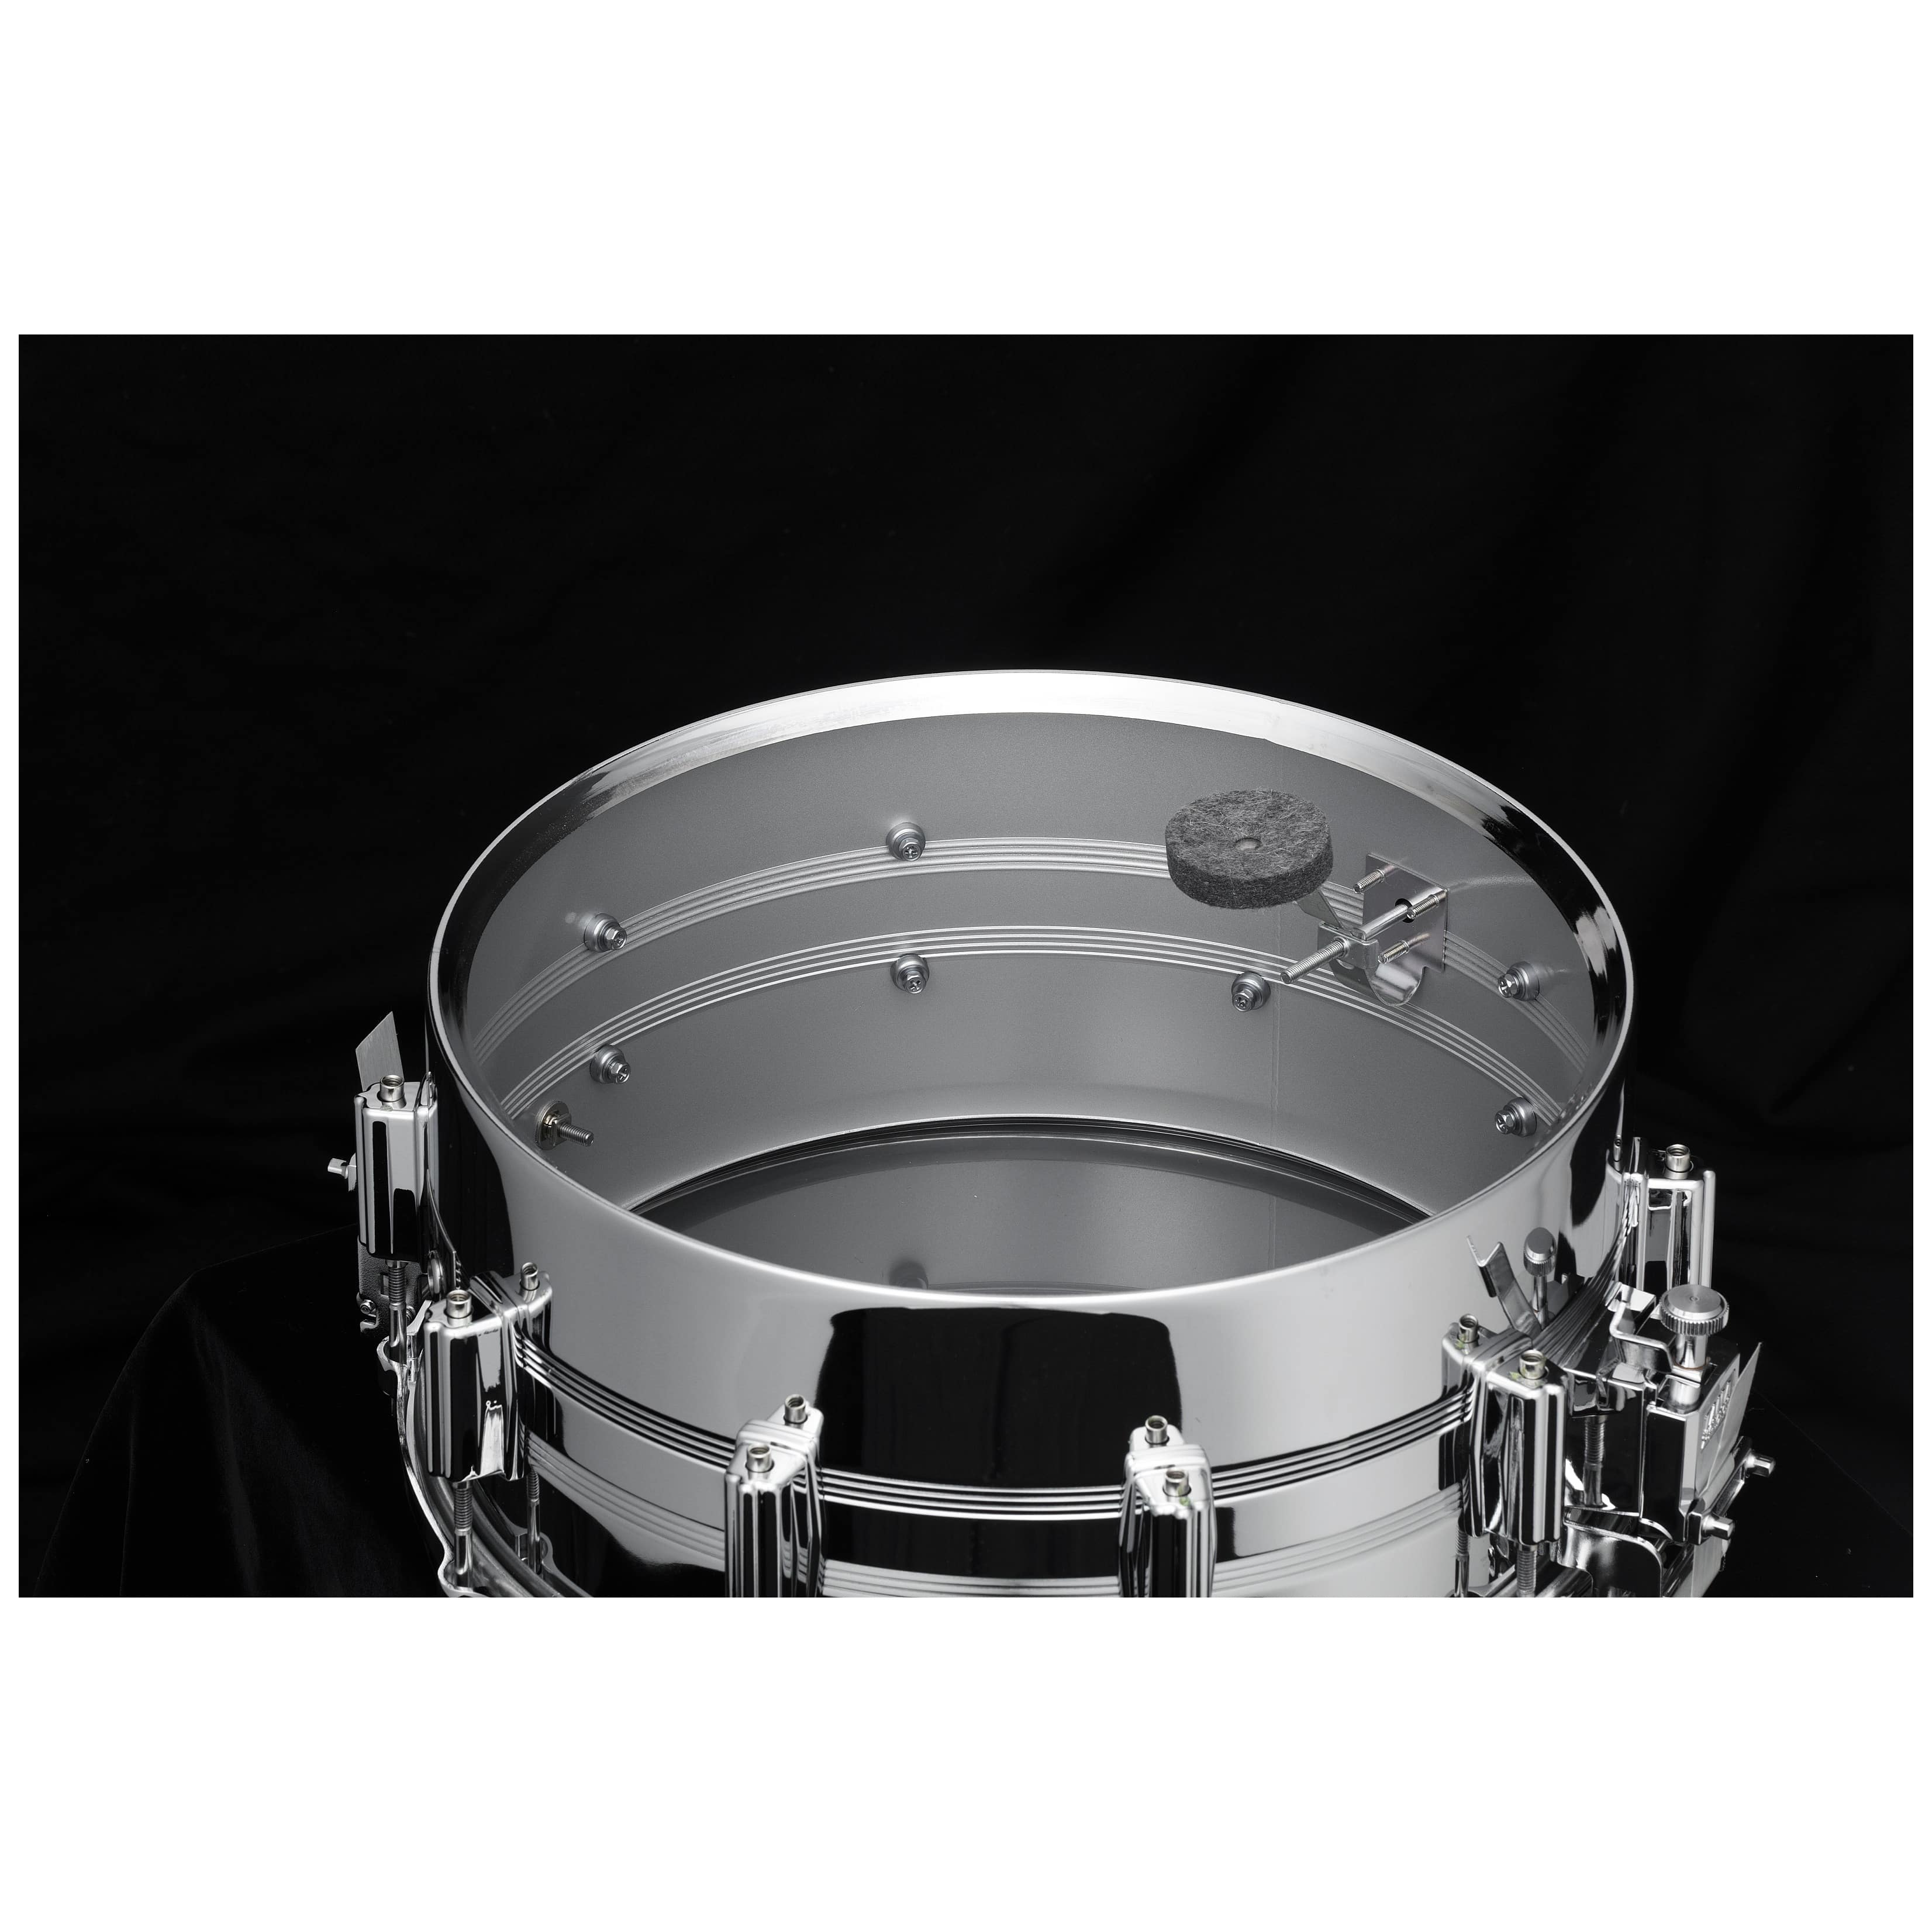 Tama 8056 - 50th LIMITED Mastercraft Steel Snare Drum  14"x6,5" 4